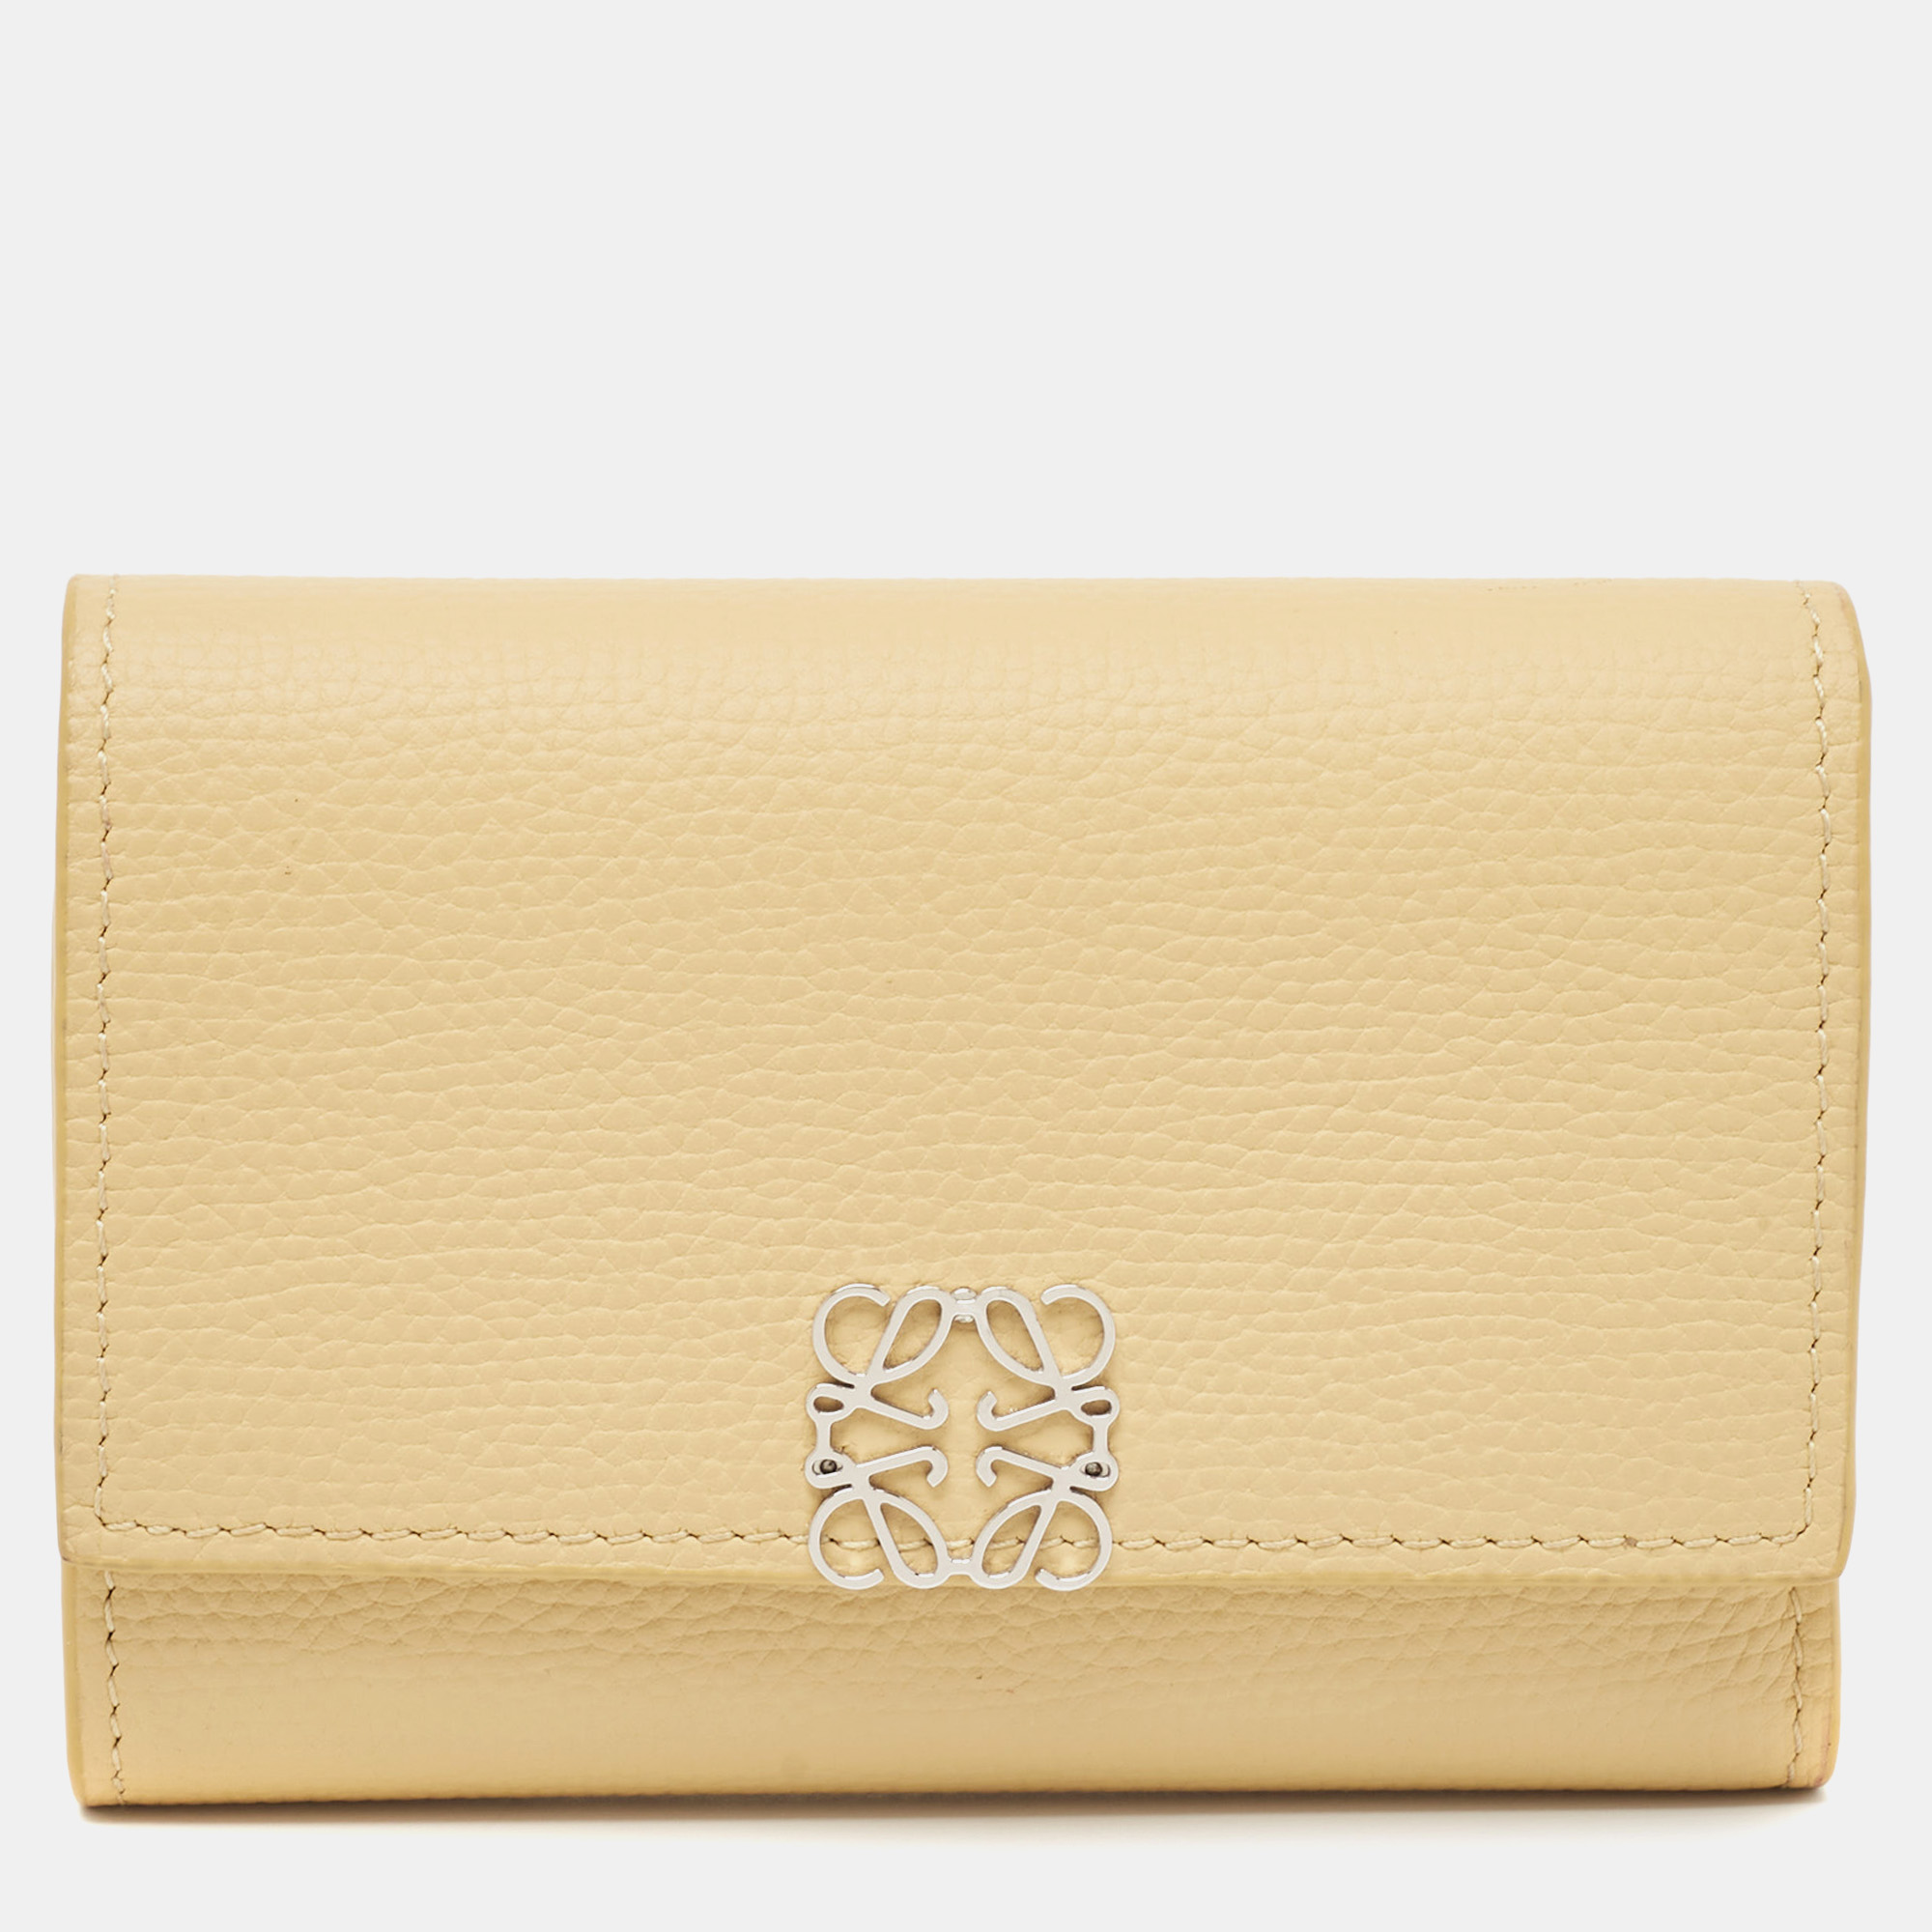 This Loewe piece is carefully crafted to offer you a luxurious accessory you will cherish. It is marked by high quality and enduring appeal. Invest in it today